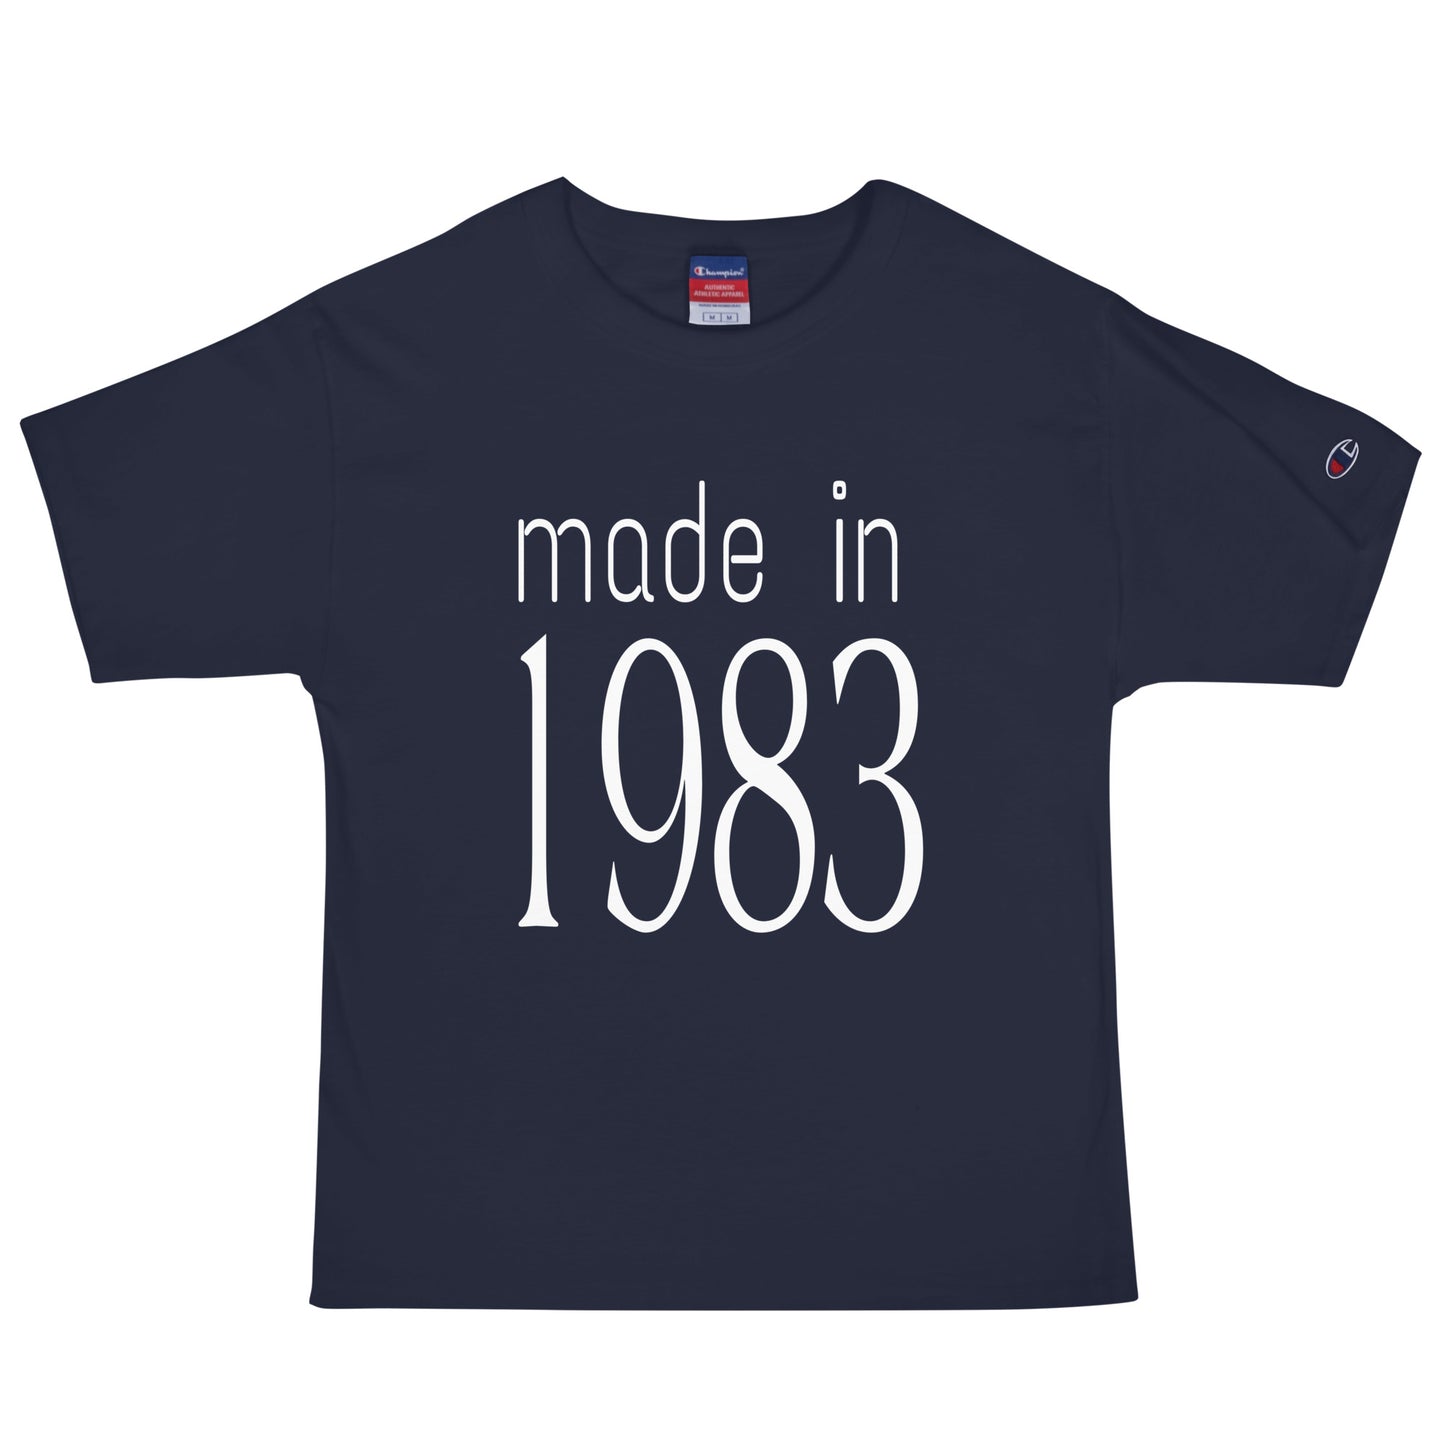 Made in 1983 Champion T-Shirt